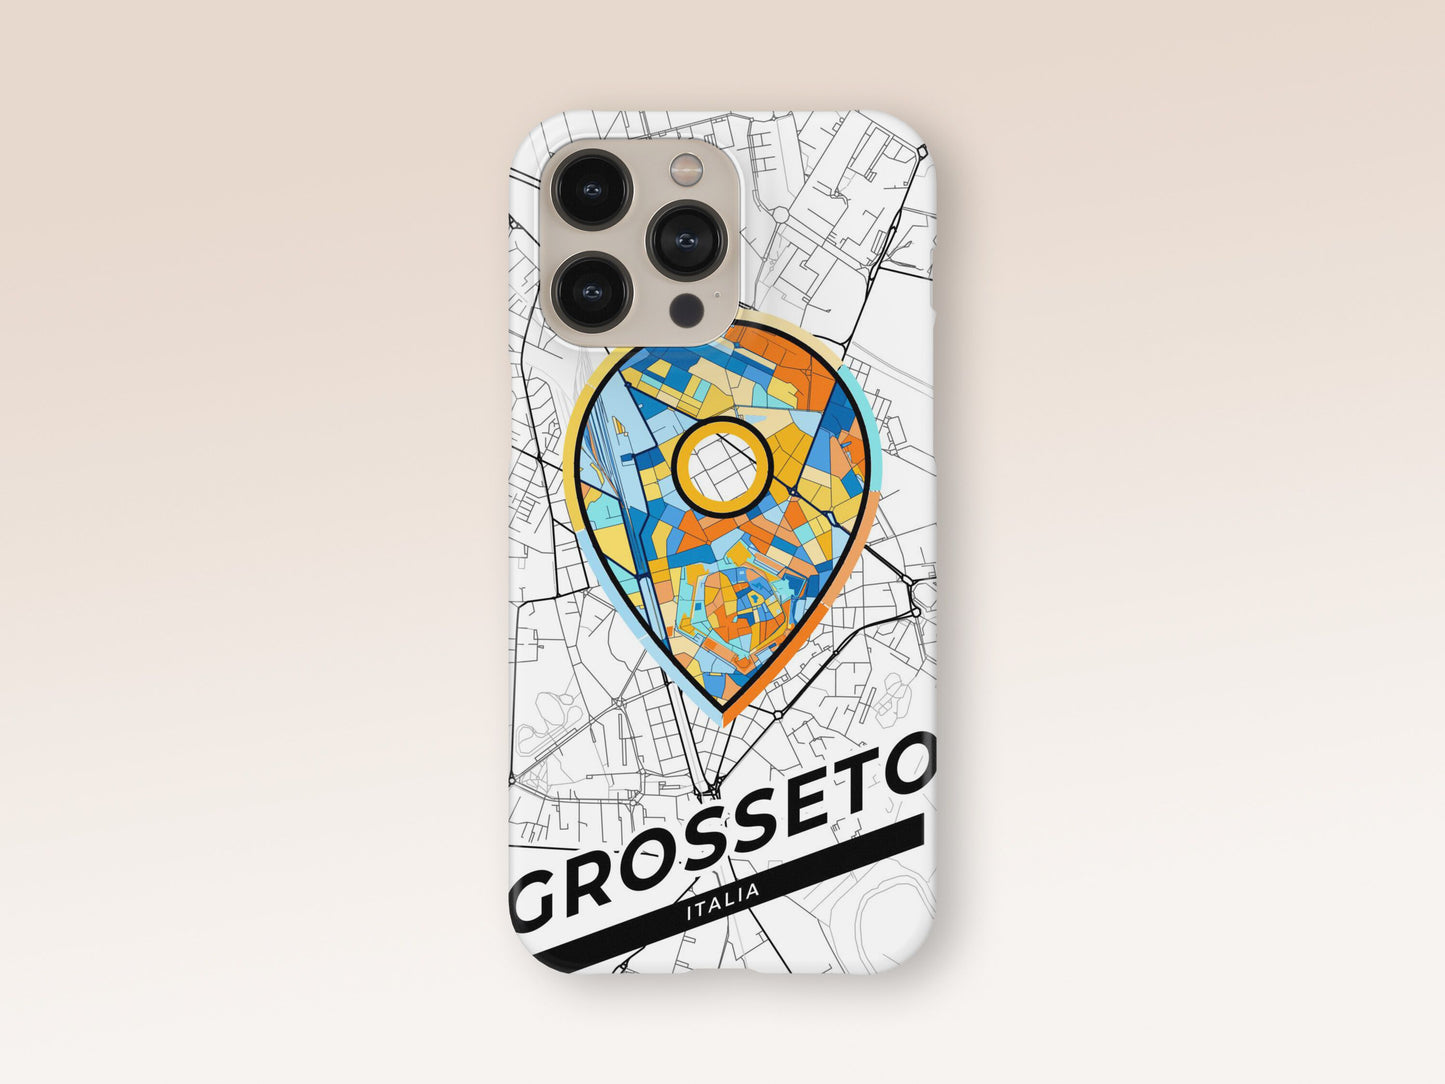 Grosseto Italy slim phone case with colorful icon. Birthday, wedding or housewarming gift. Couple match cases. 1